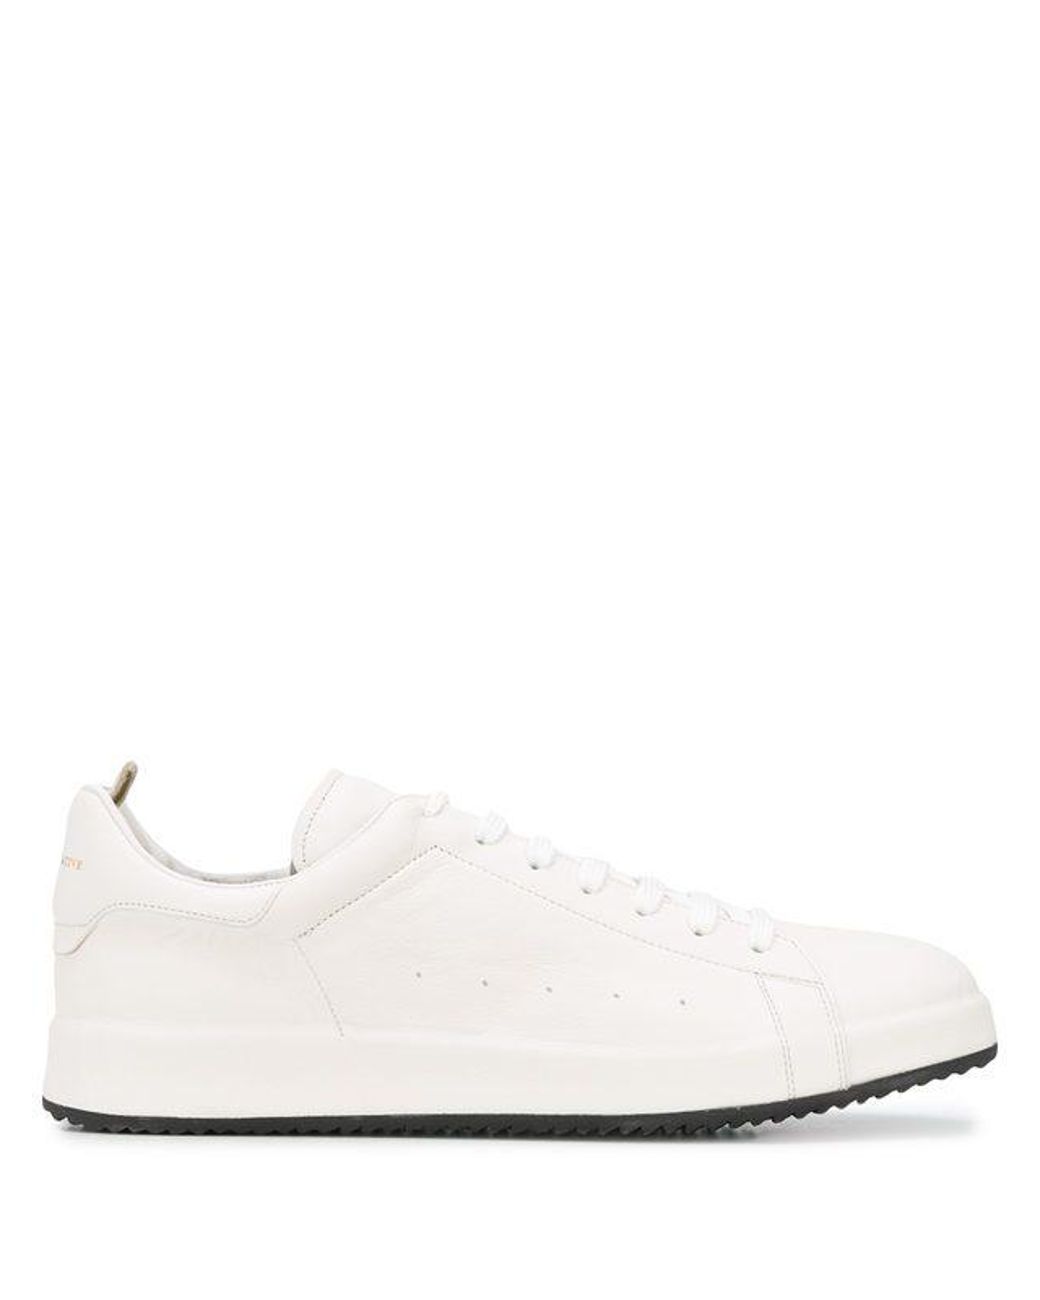 Officine Creative Leather Sneakers in White for Men - Lyst